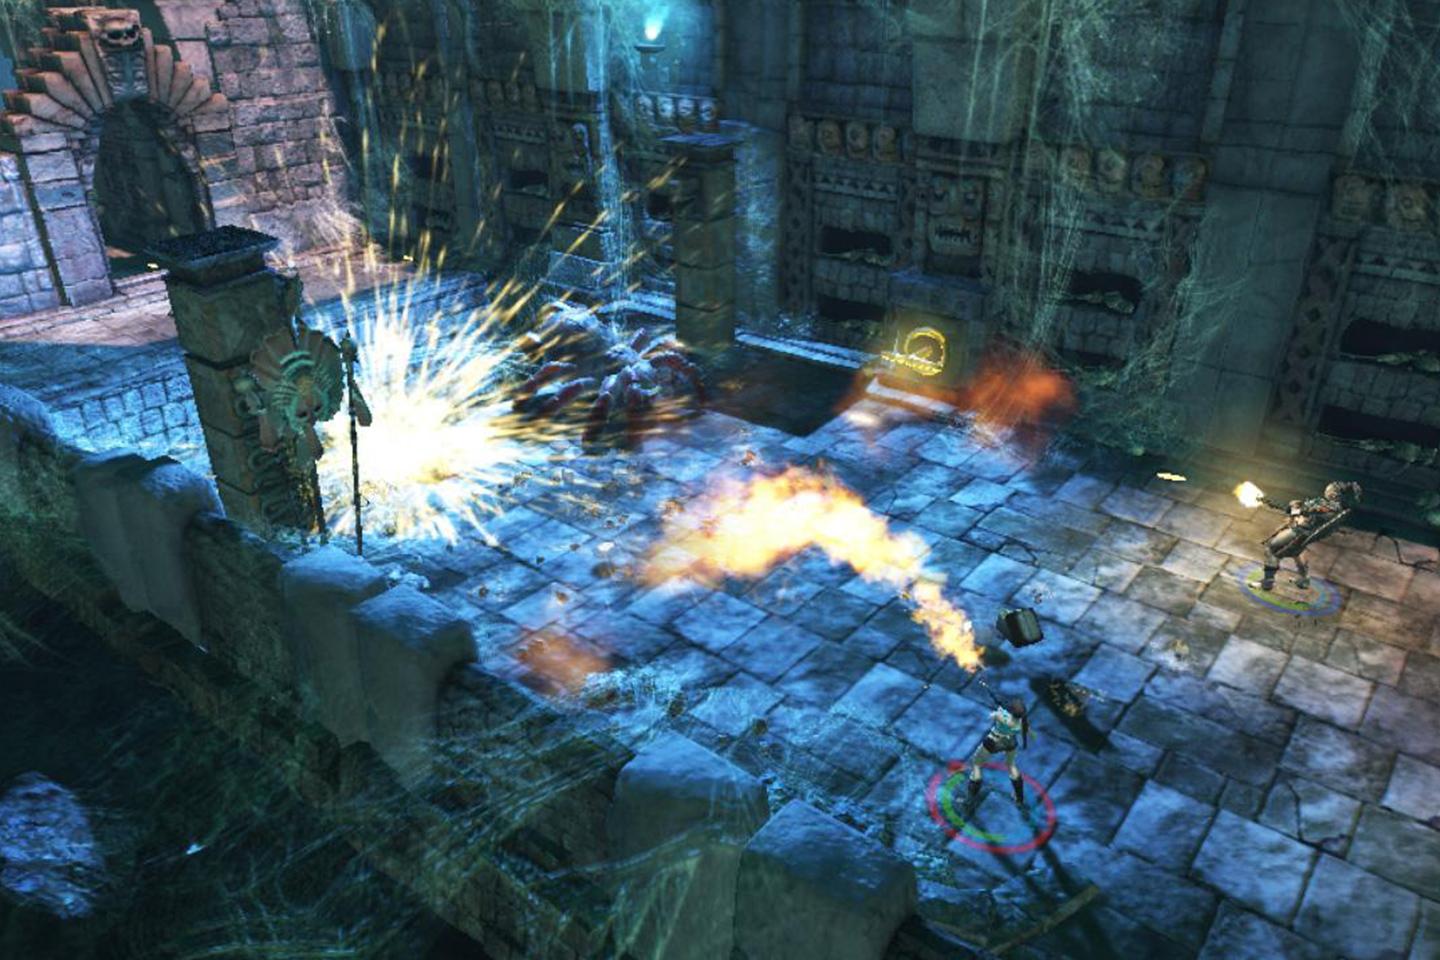 A high-energy scene from a Tomb Raider game with characters fighting a giant spider on a temple ruin, using flamethrowers and magical abilities.